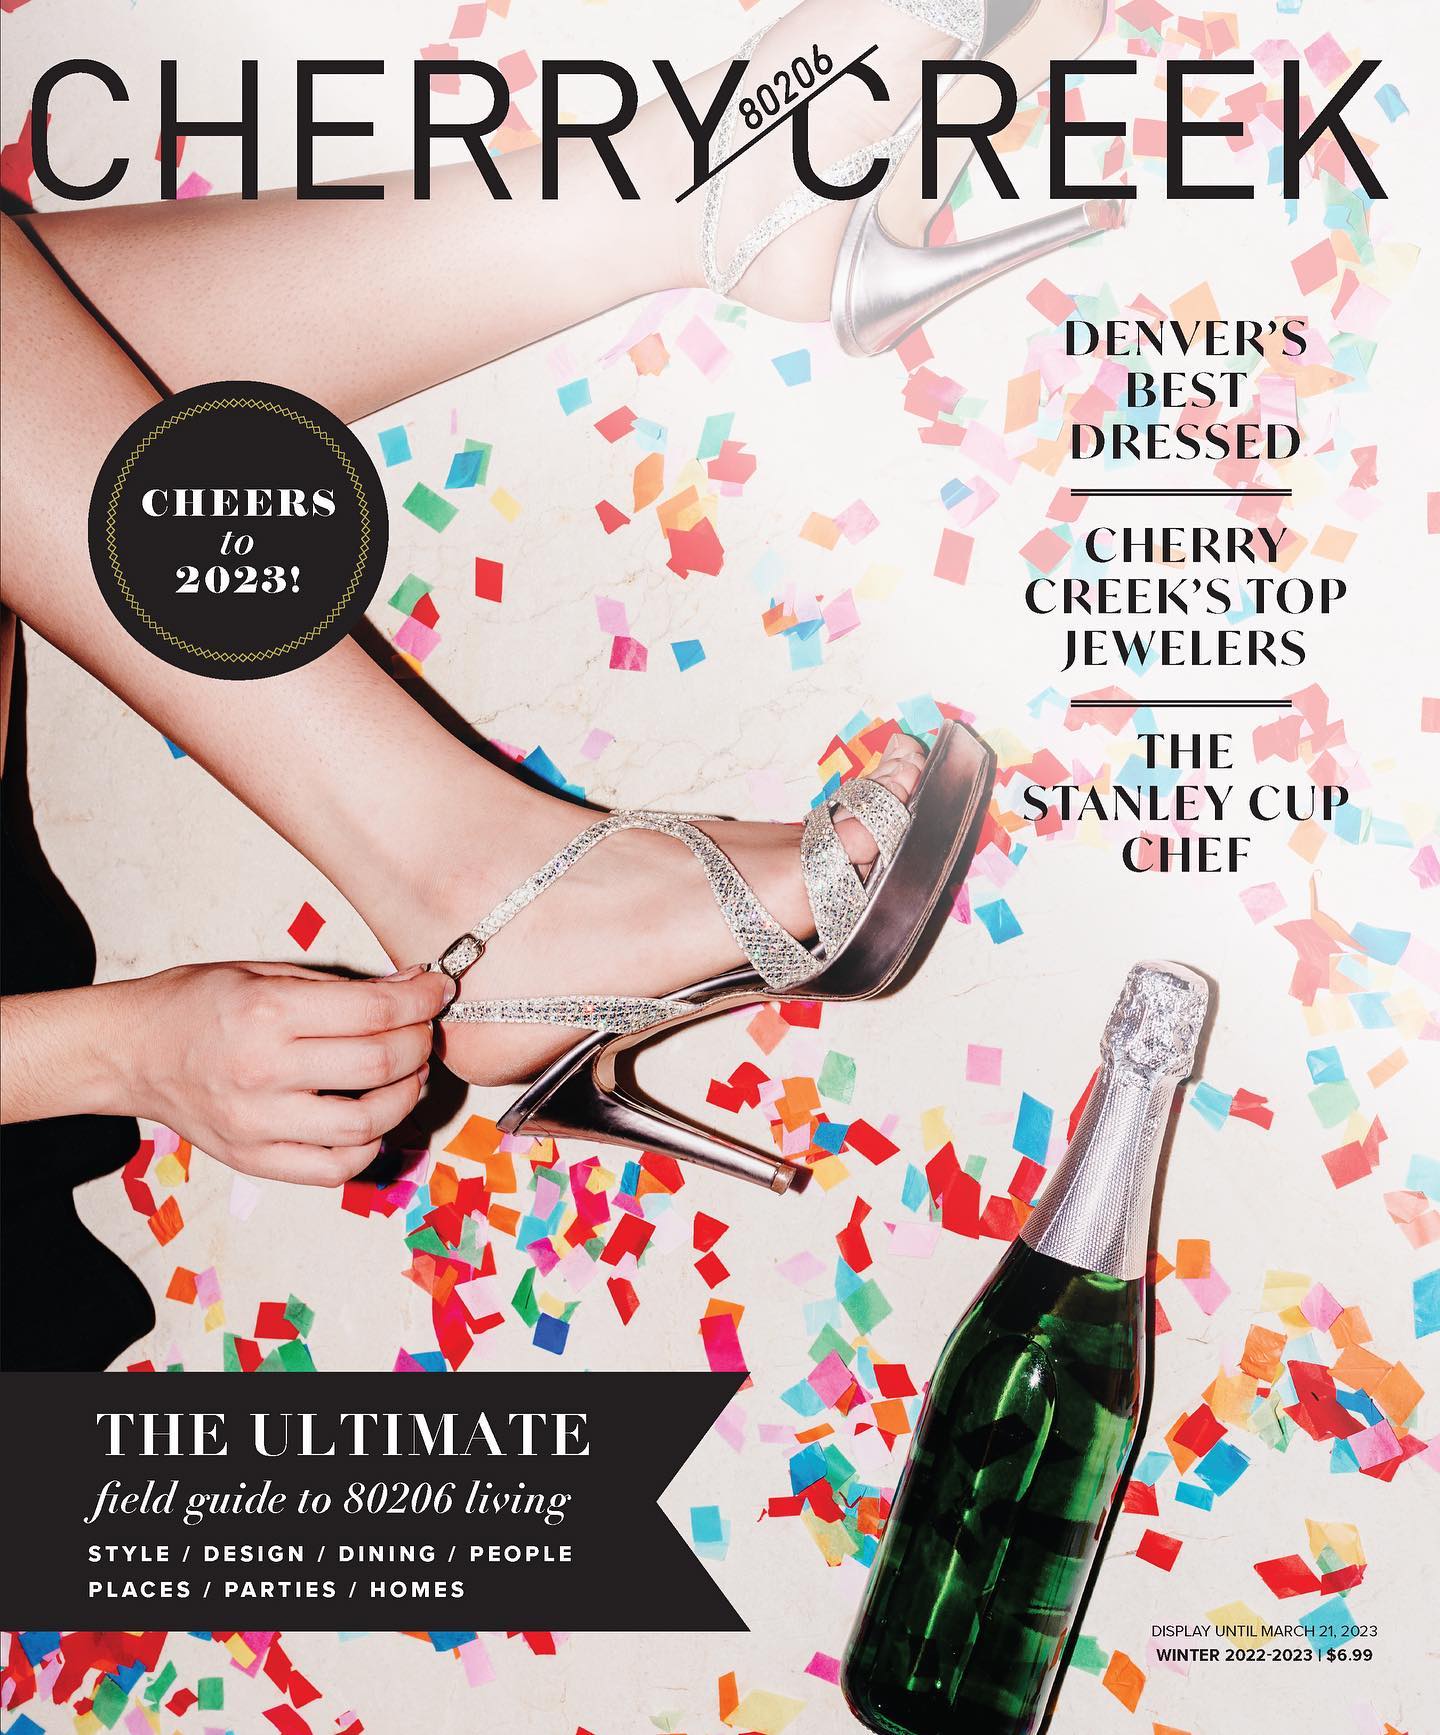 Have you read our new issue yet? Online and in mailboxes now, we are celebrating the best of Cherry Creek. Link in bio to read the digital edition now! 🍒 
.
.
.
.
#cherrycreek #cherrycreekdenver #cherrycreekliving #denvercolorado #denversmallbusiness